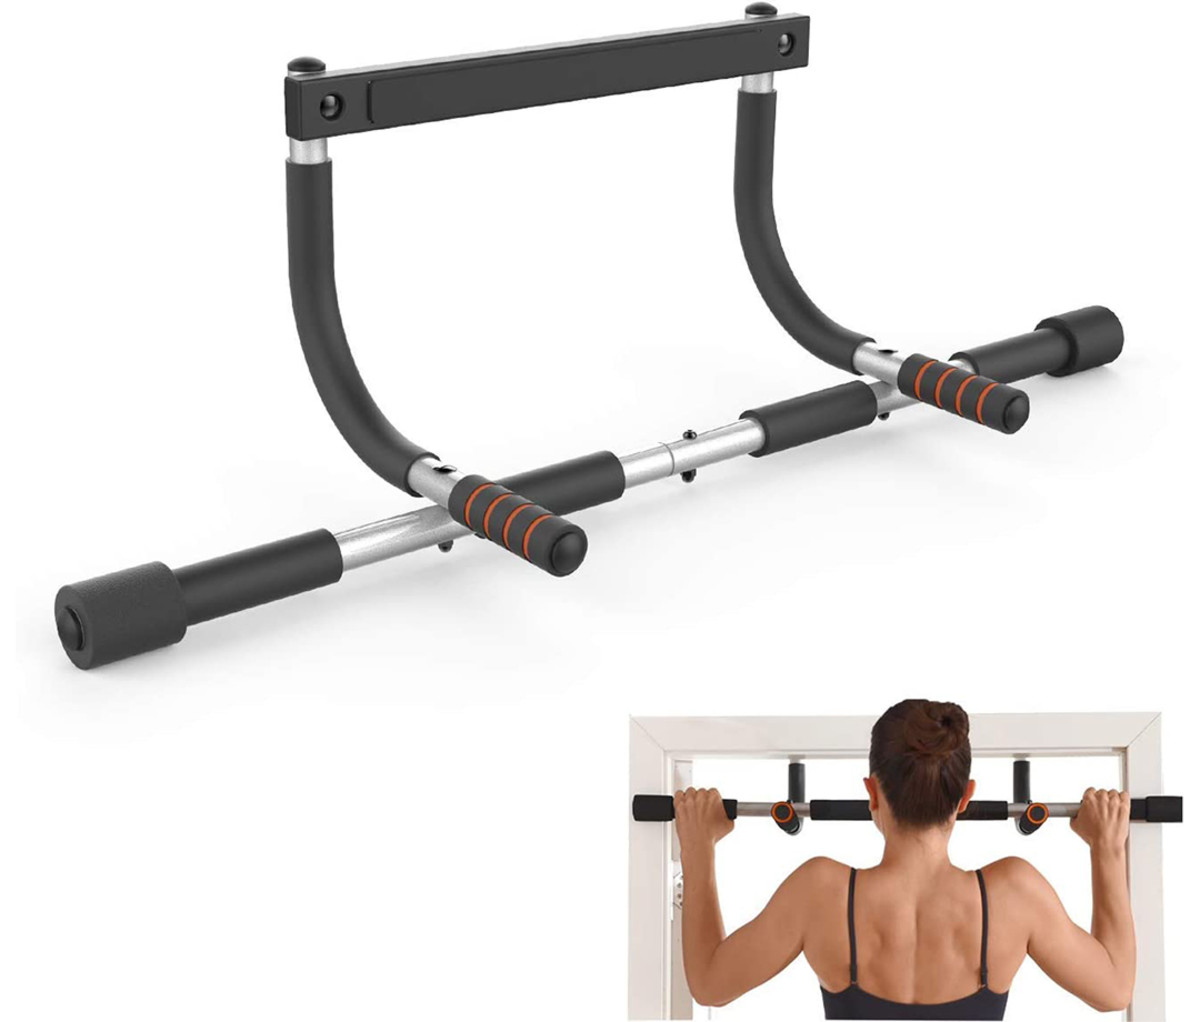 Multi-Use Pull-Up Bars Balance Door Gym Trainer-Chin Up Bar Body Training Heavy Weight Machine Accessories Sports Folding Doorway Pull Up Bars for Fitness,Workout 